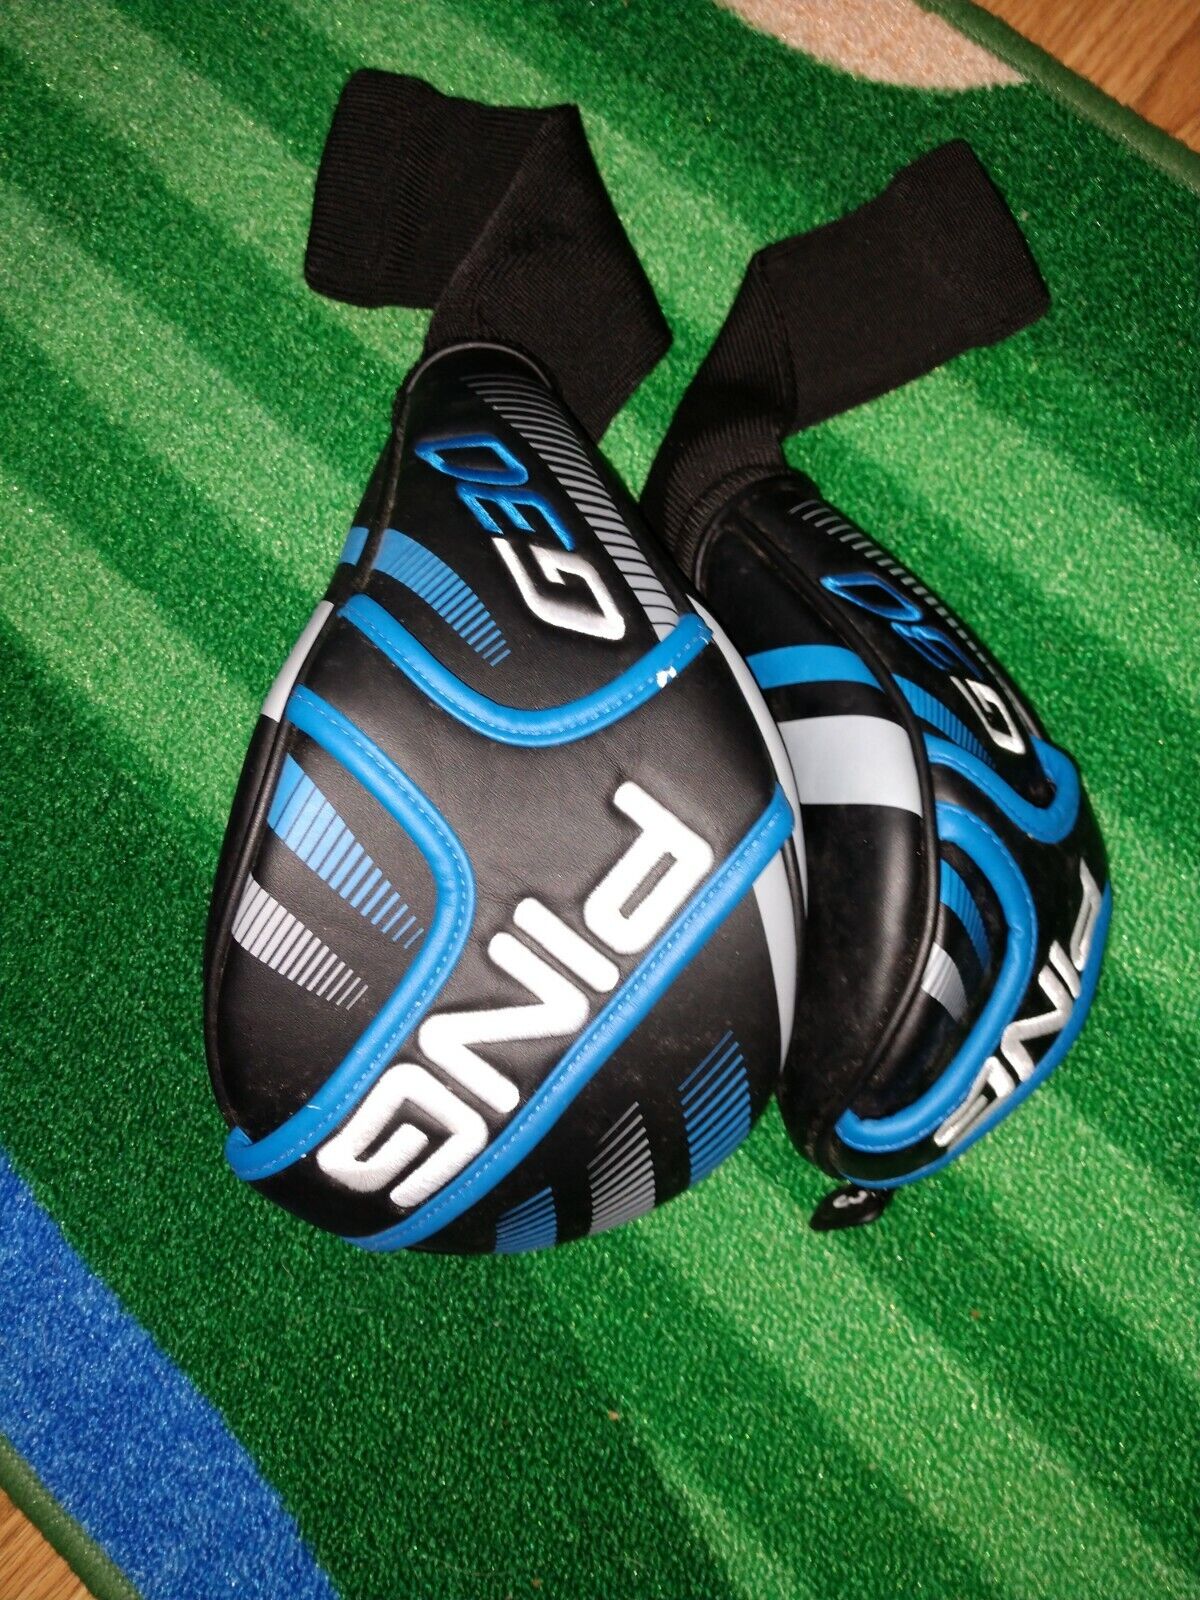 Ping G30 headcover